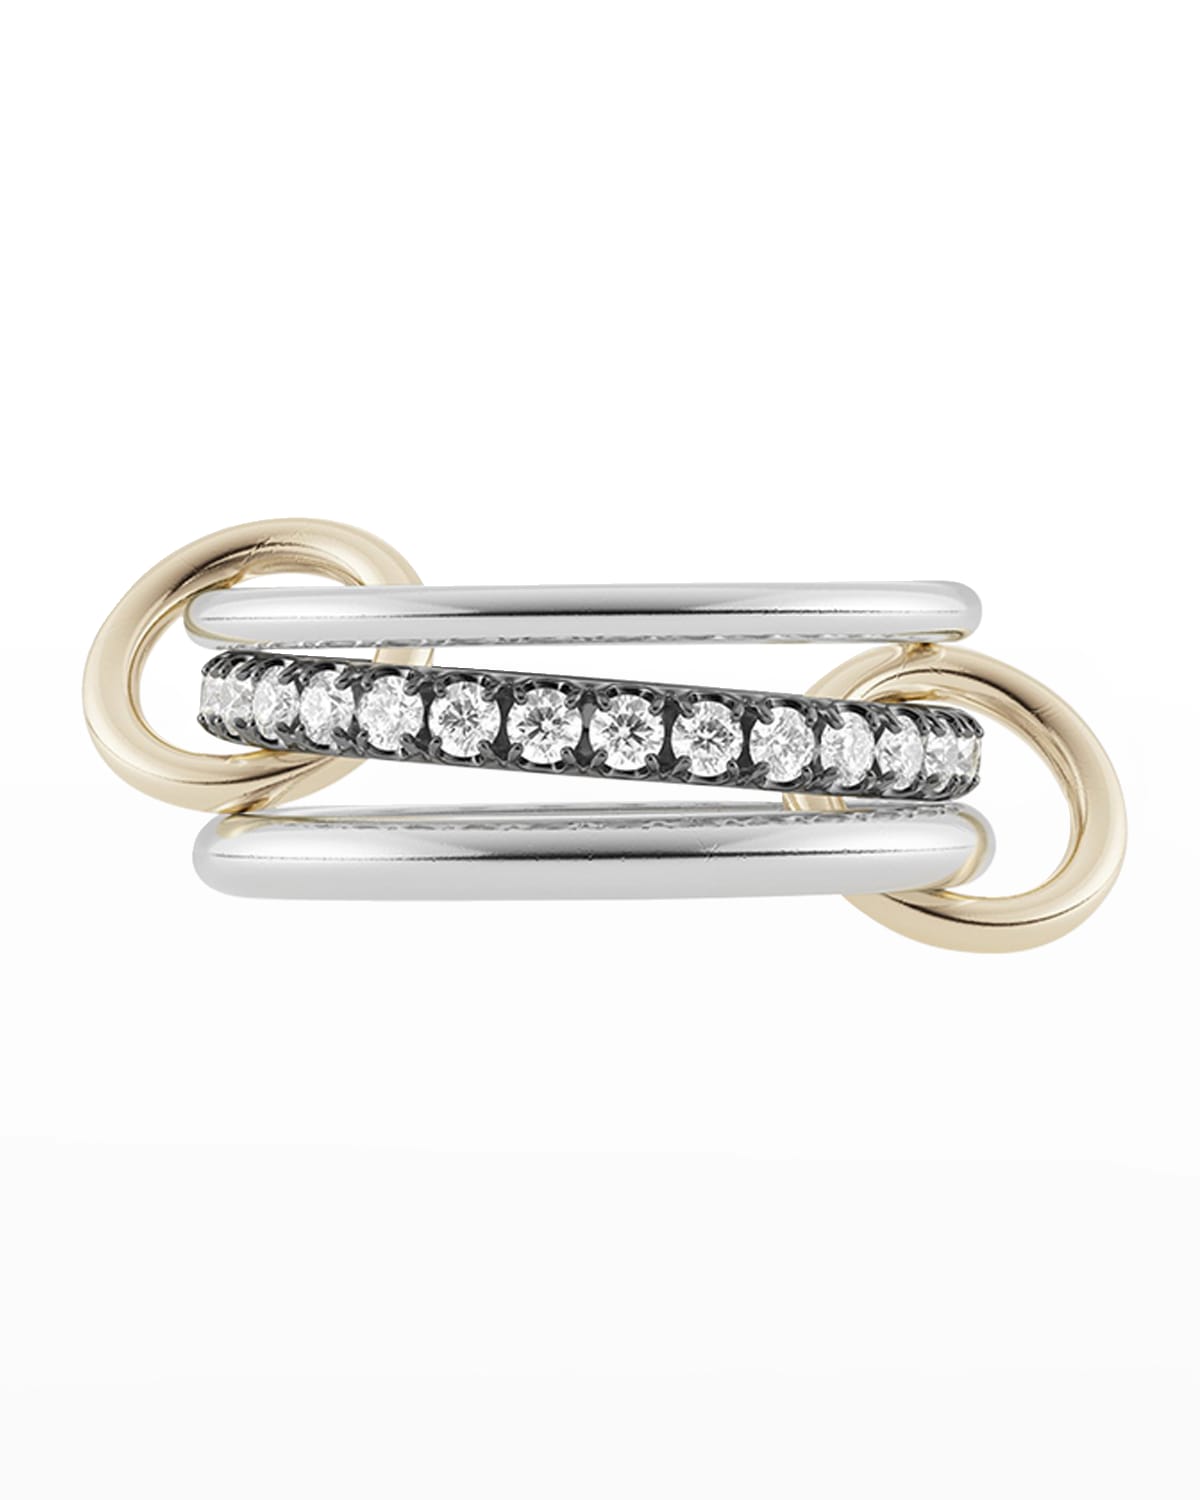 SPINELLI KILCOLLIN 3-LINK RING IN STERLING SILVER WITH DIAMONDS, BLACK RHODIUM AND YELLOW GOLD